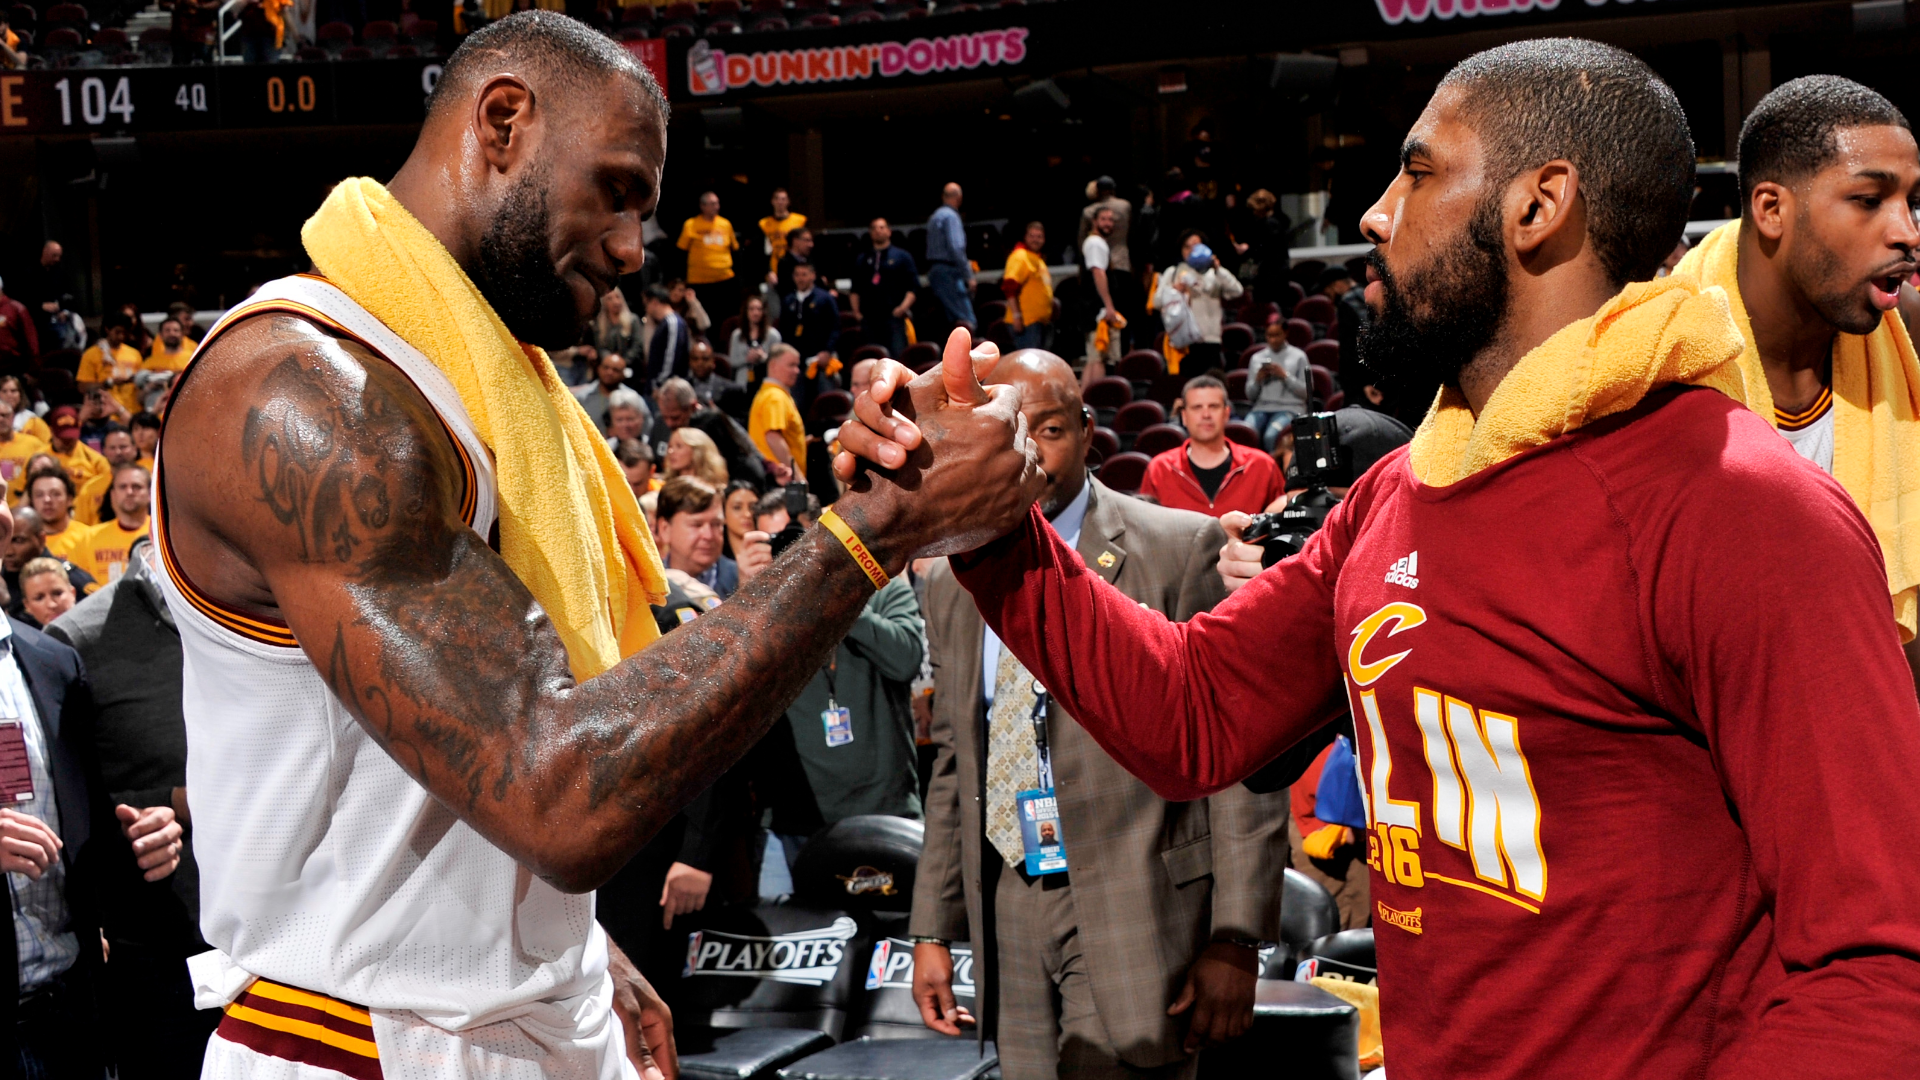 Inspiredlovers lebron-james-kyrie-irving-cleveland-cavaliers_118styuliqwxd1xt51oqwfkic1 Nets Finally Name Their Price for a Kyrie Irving- LeBron James Reunion at the Lakers in an... NBA Sports  NBA News Lebron James Lakers Kyrie Irving Brooklyn Nets 